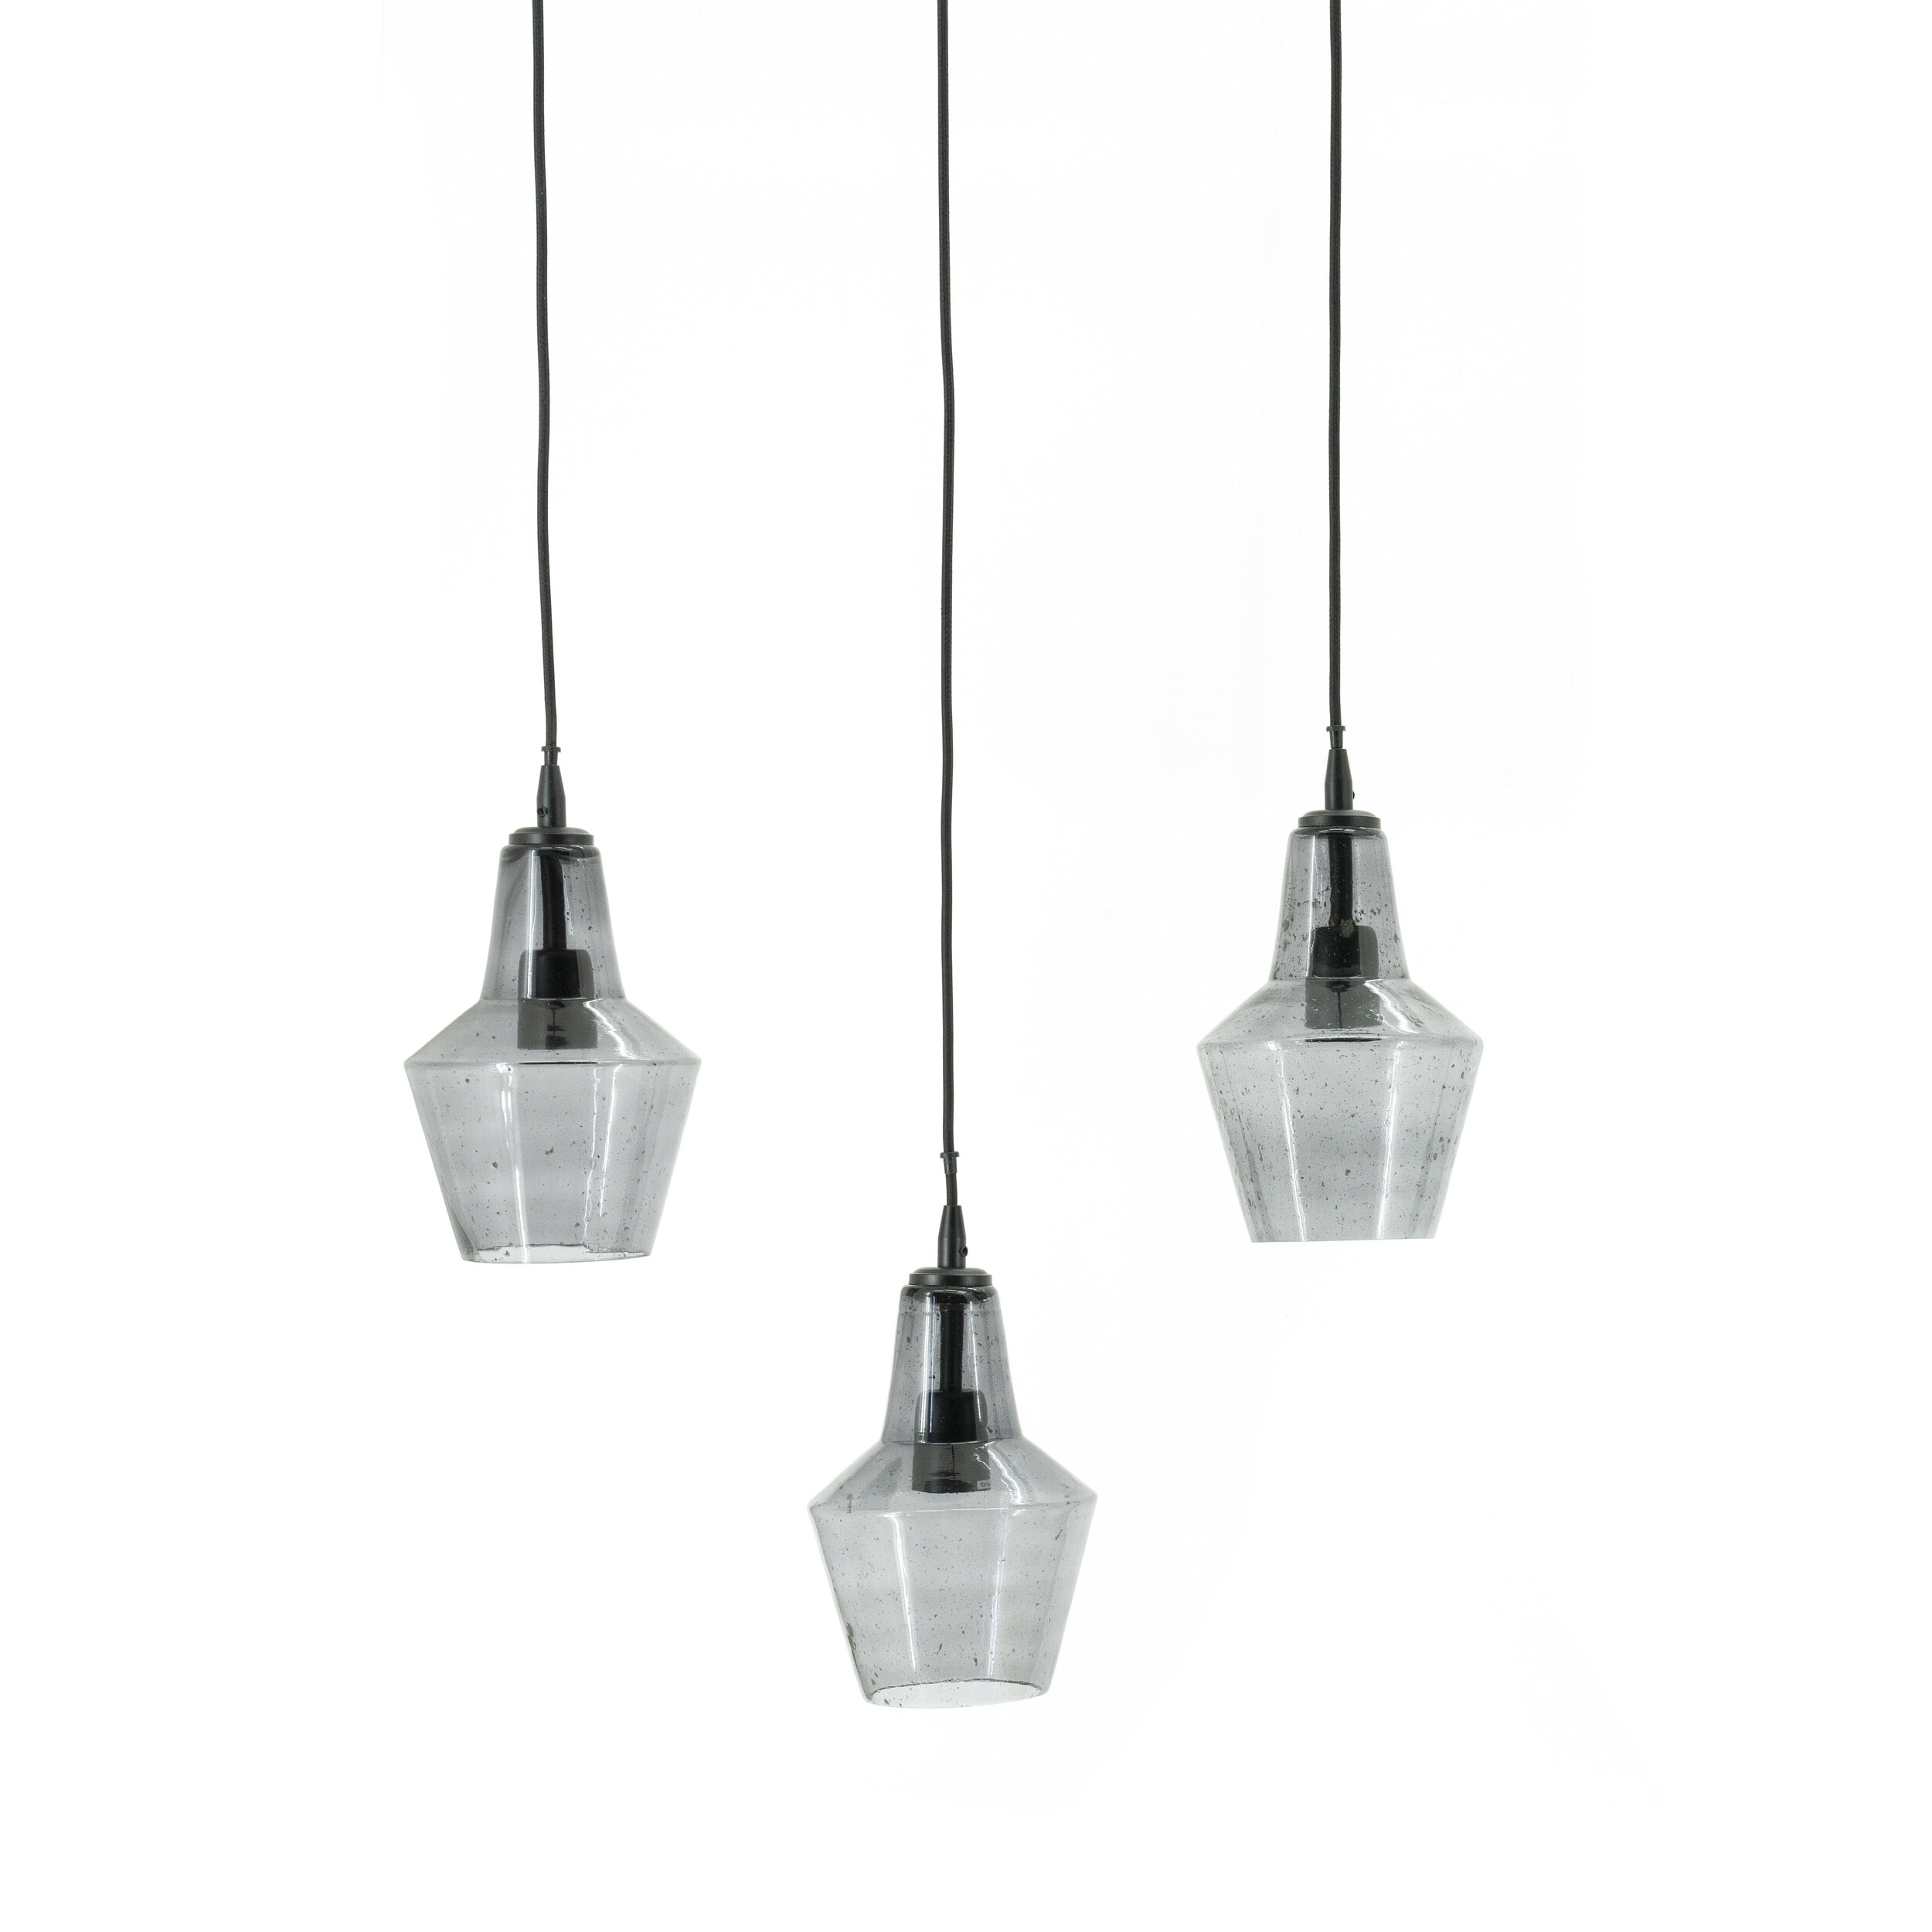 By-Boo Hanglamp Orion Glas - Zwart